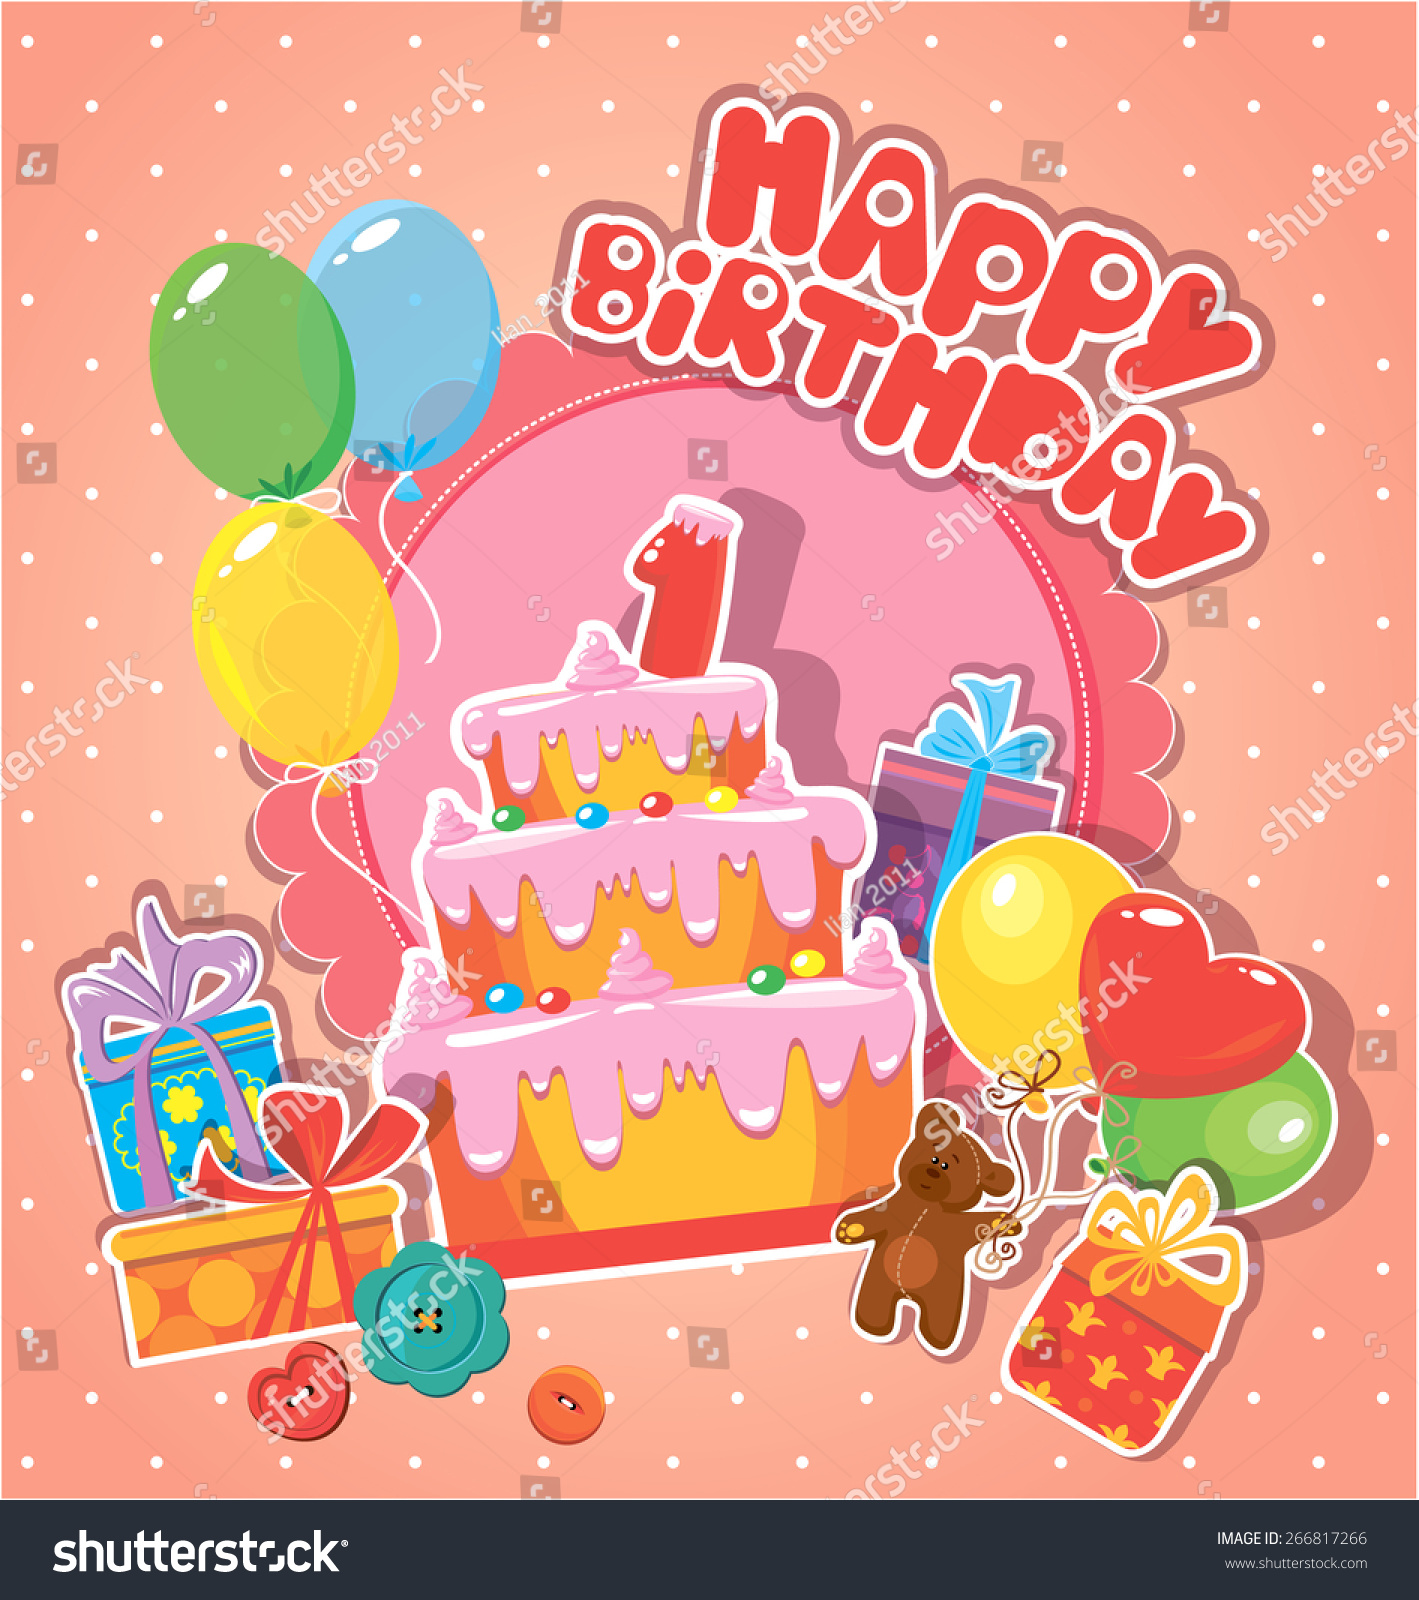 Baby Birthday Card With Teddy Bear, Big Cake And Gift Boxes. One Year ...